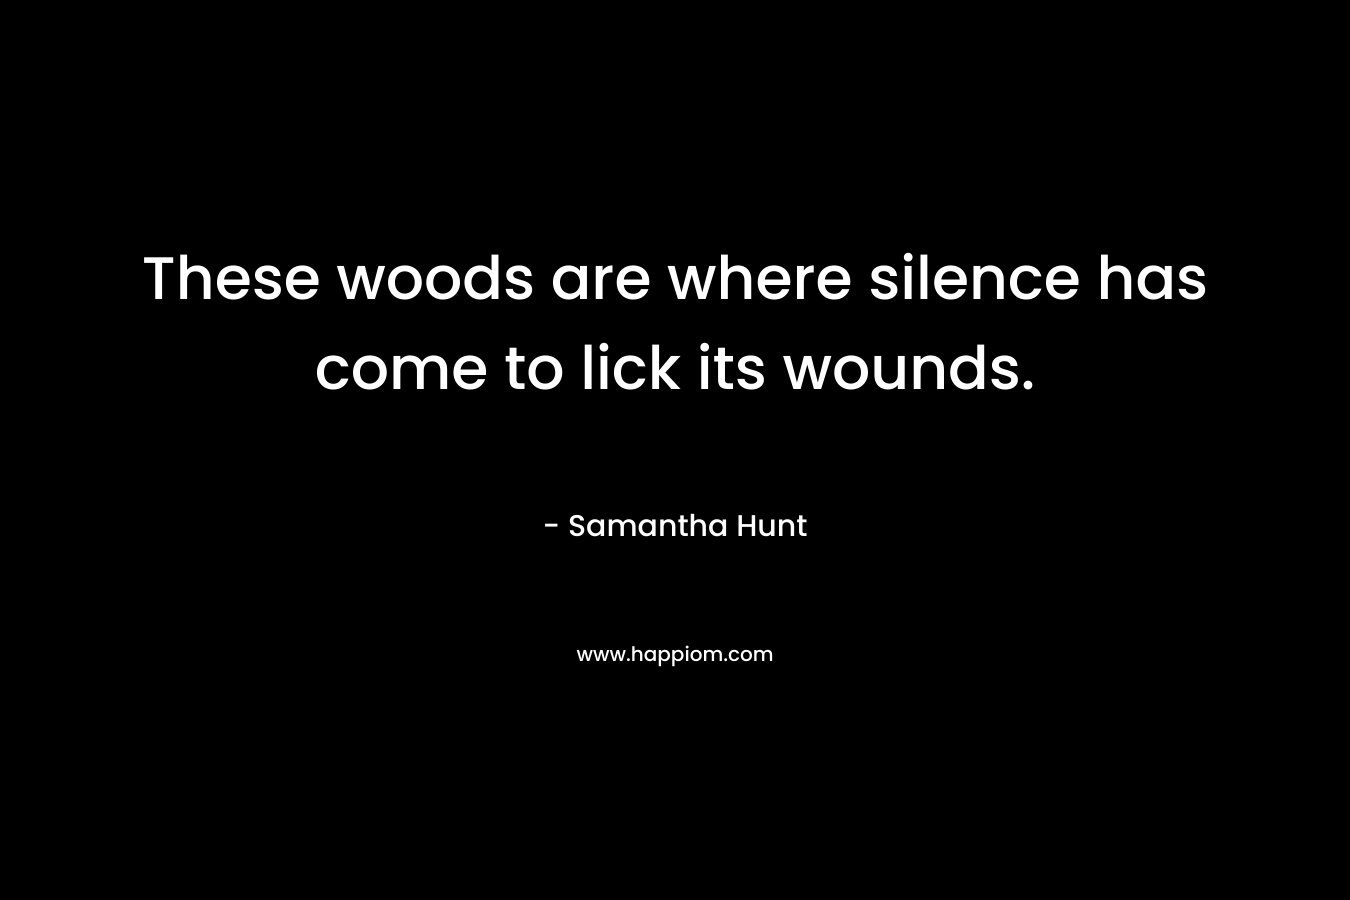 These woods are where silence has come to lick its wounds.